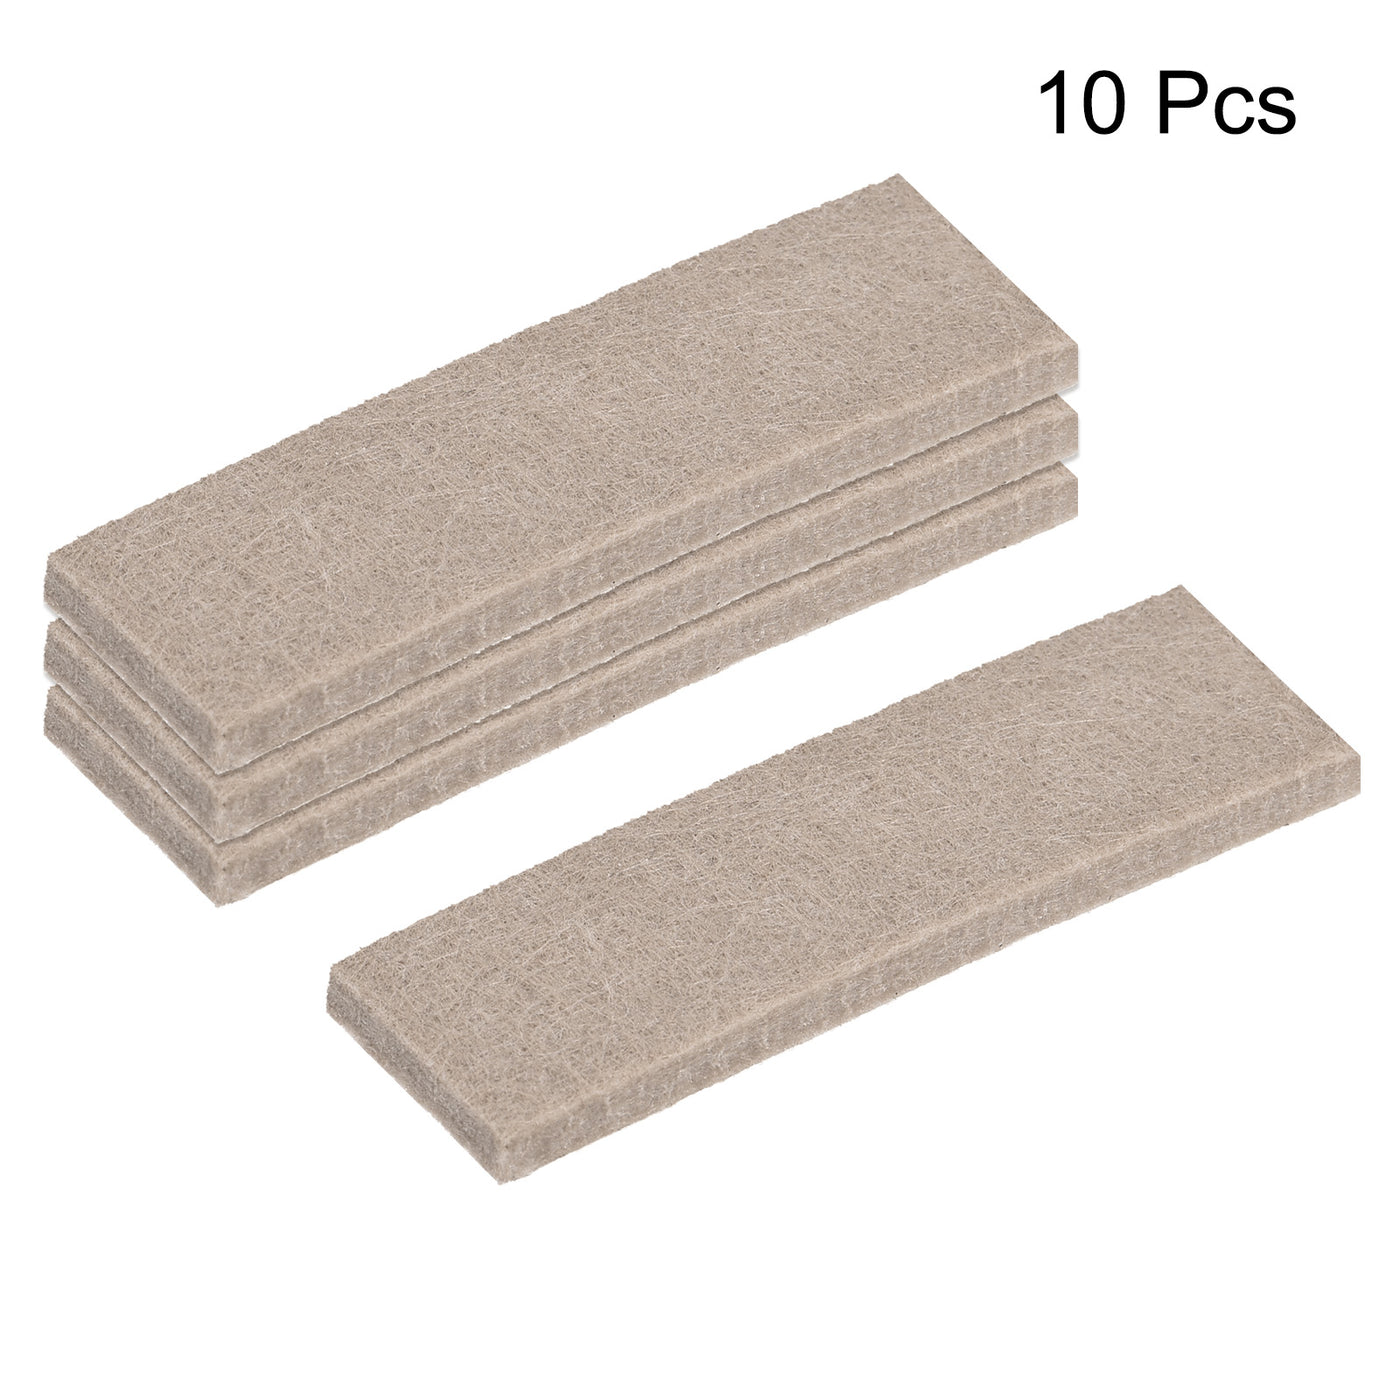 uxcell Uxcell Self Adhesive Felt Tape 3.9 Inch x 1 Inch Furniture Strip Roll Beige 10pcs